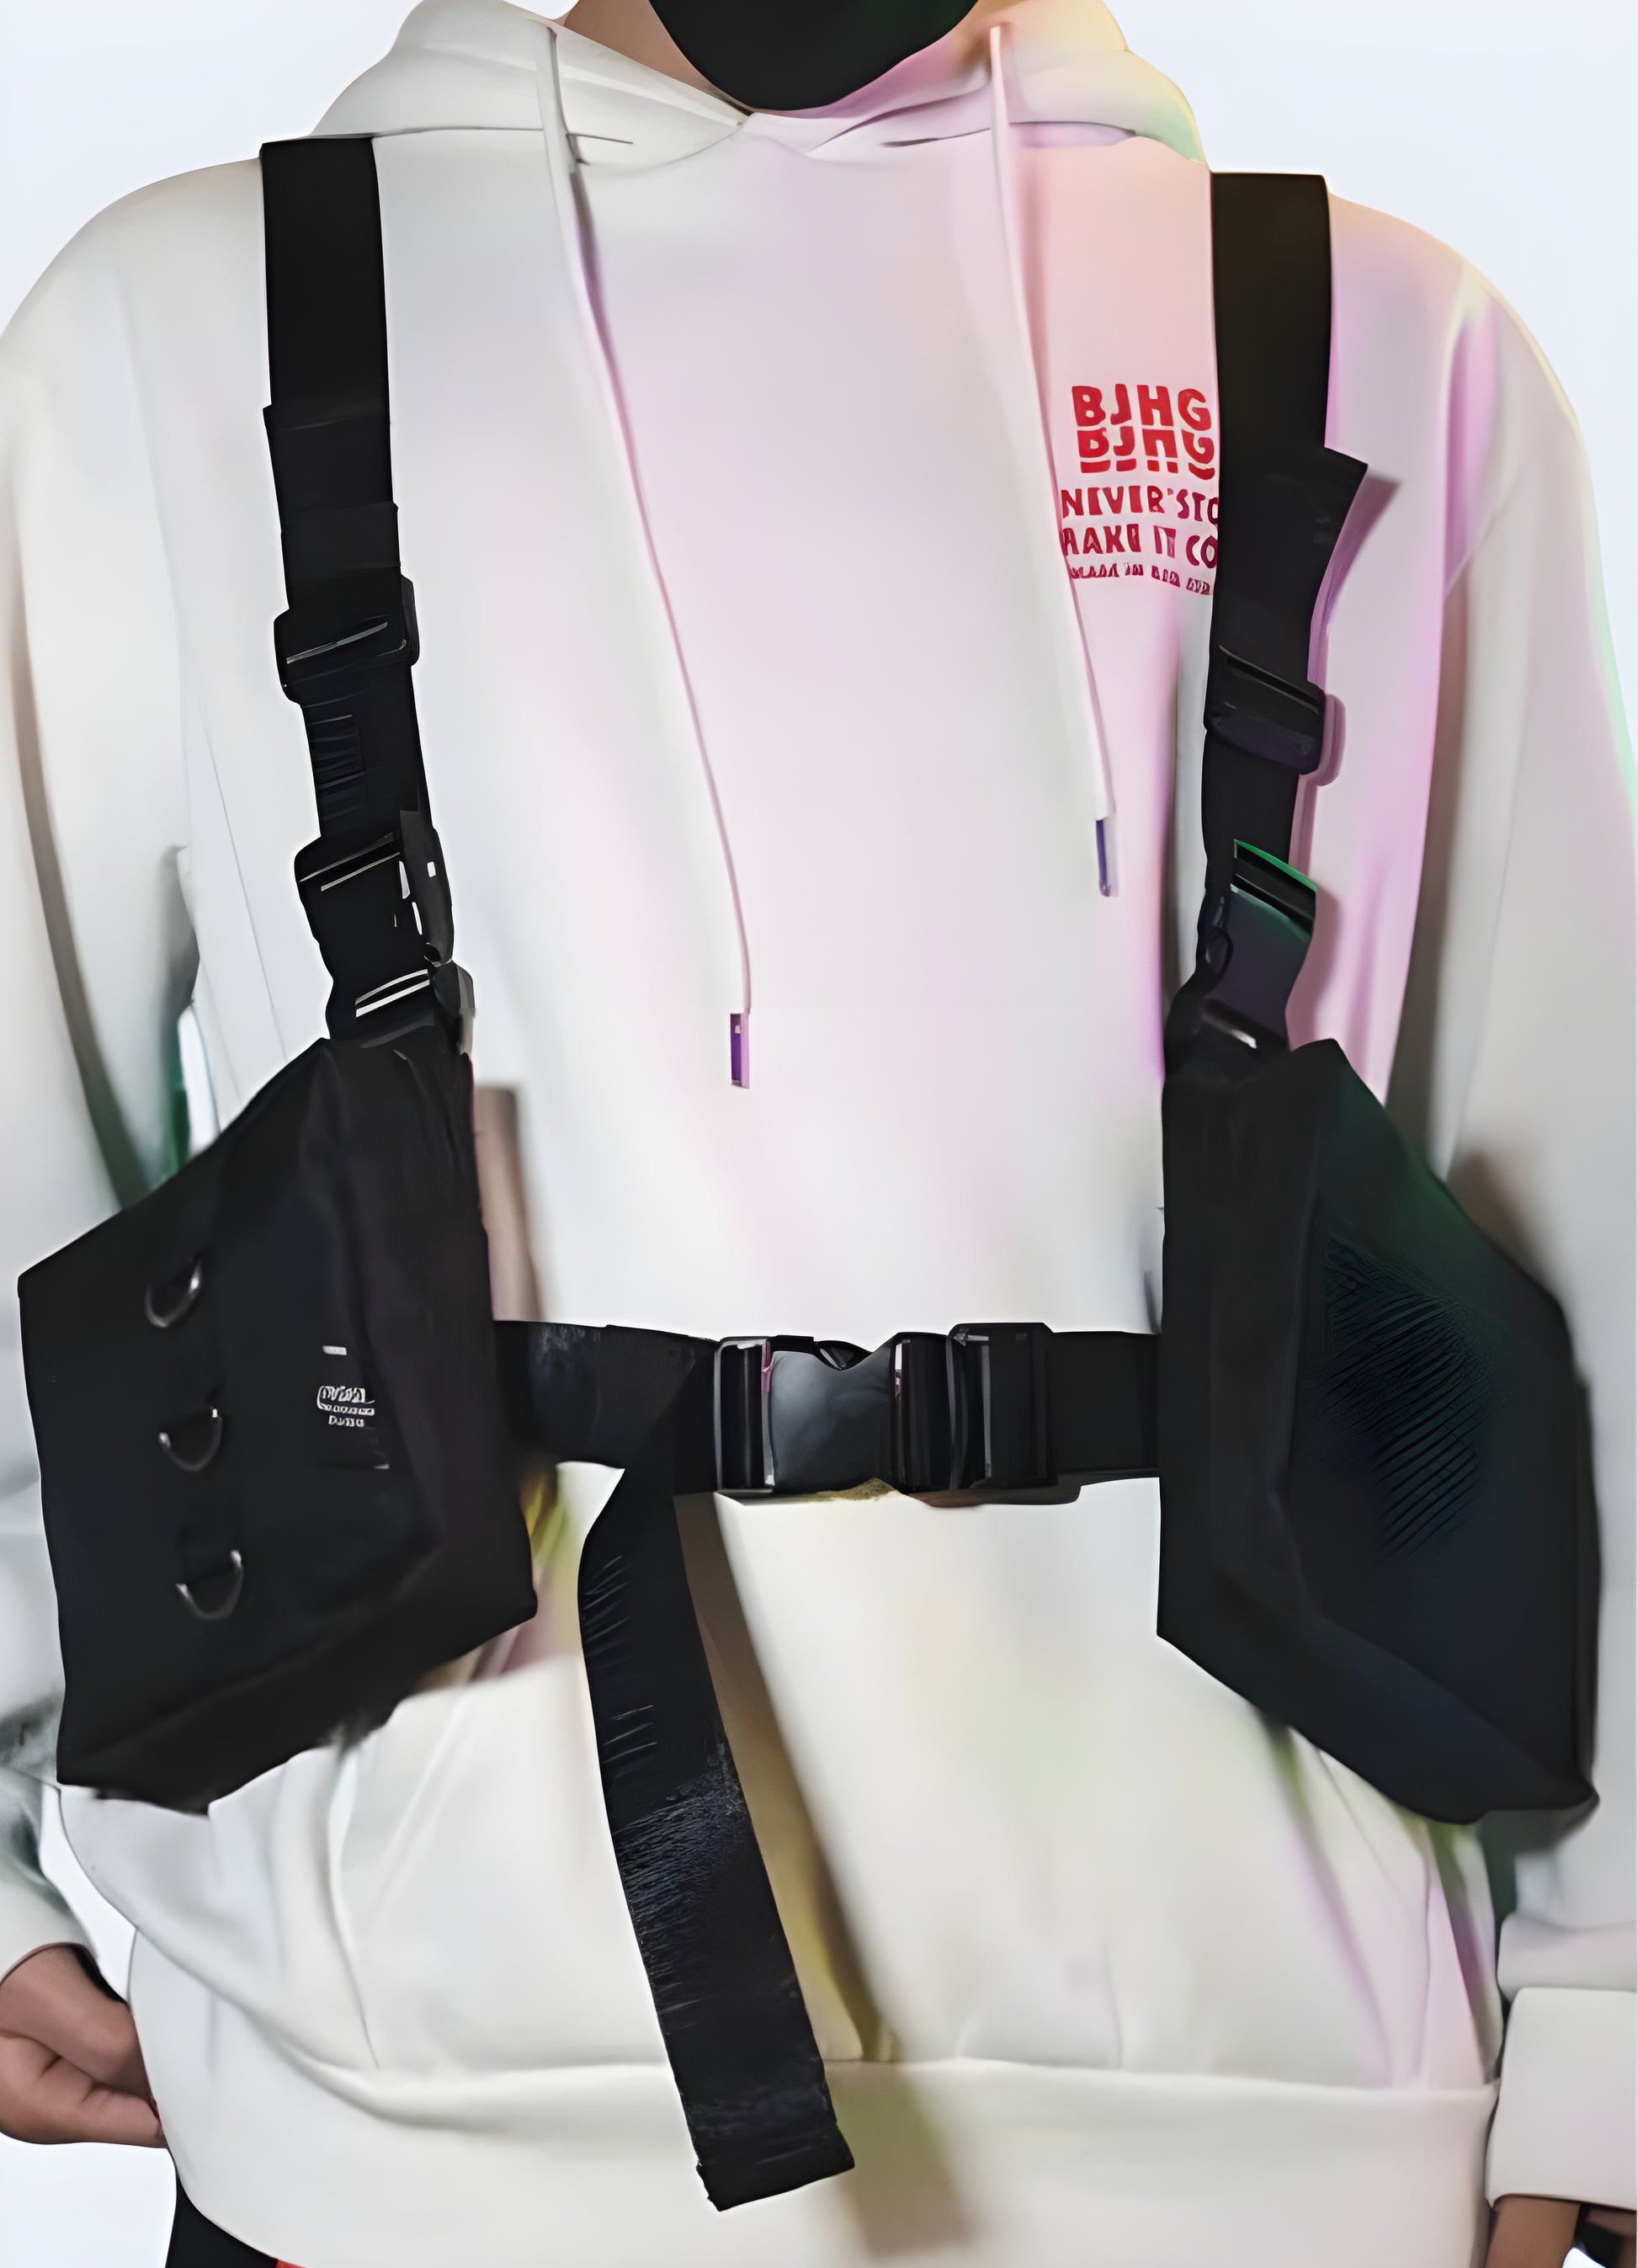 With two side pockets, these bags have a unique design that look just right for Gothic ninja outfits.